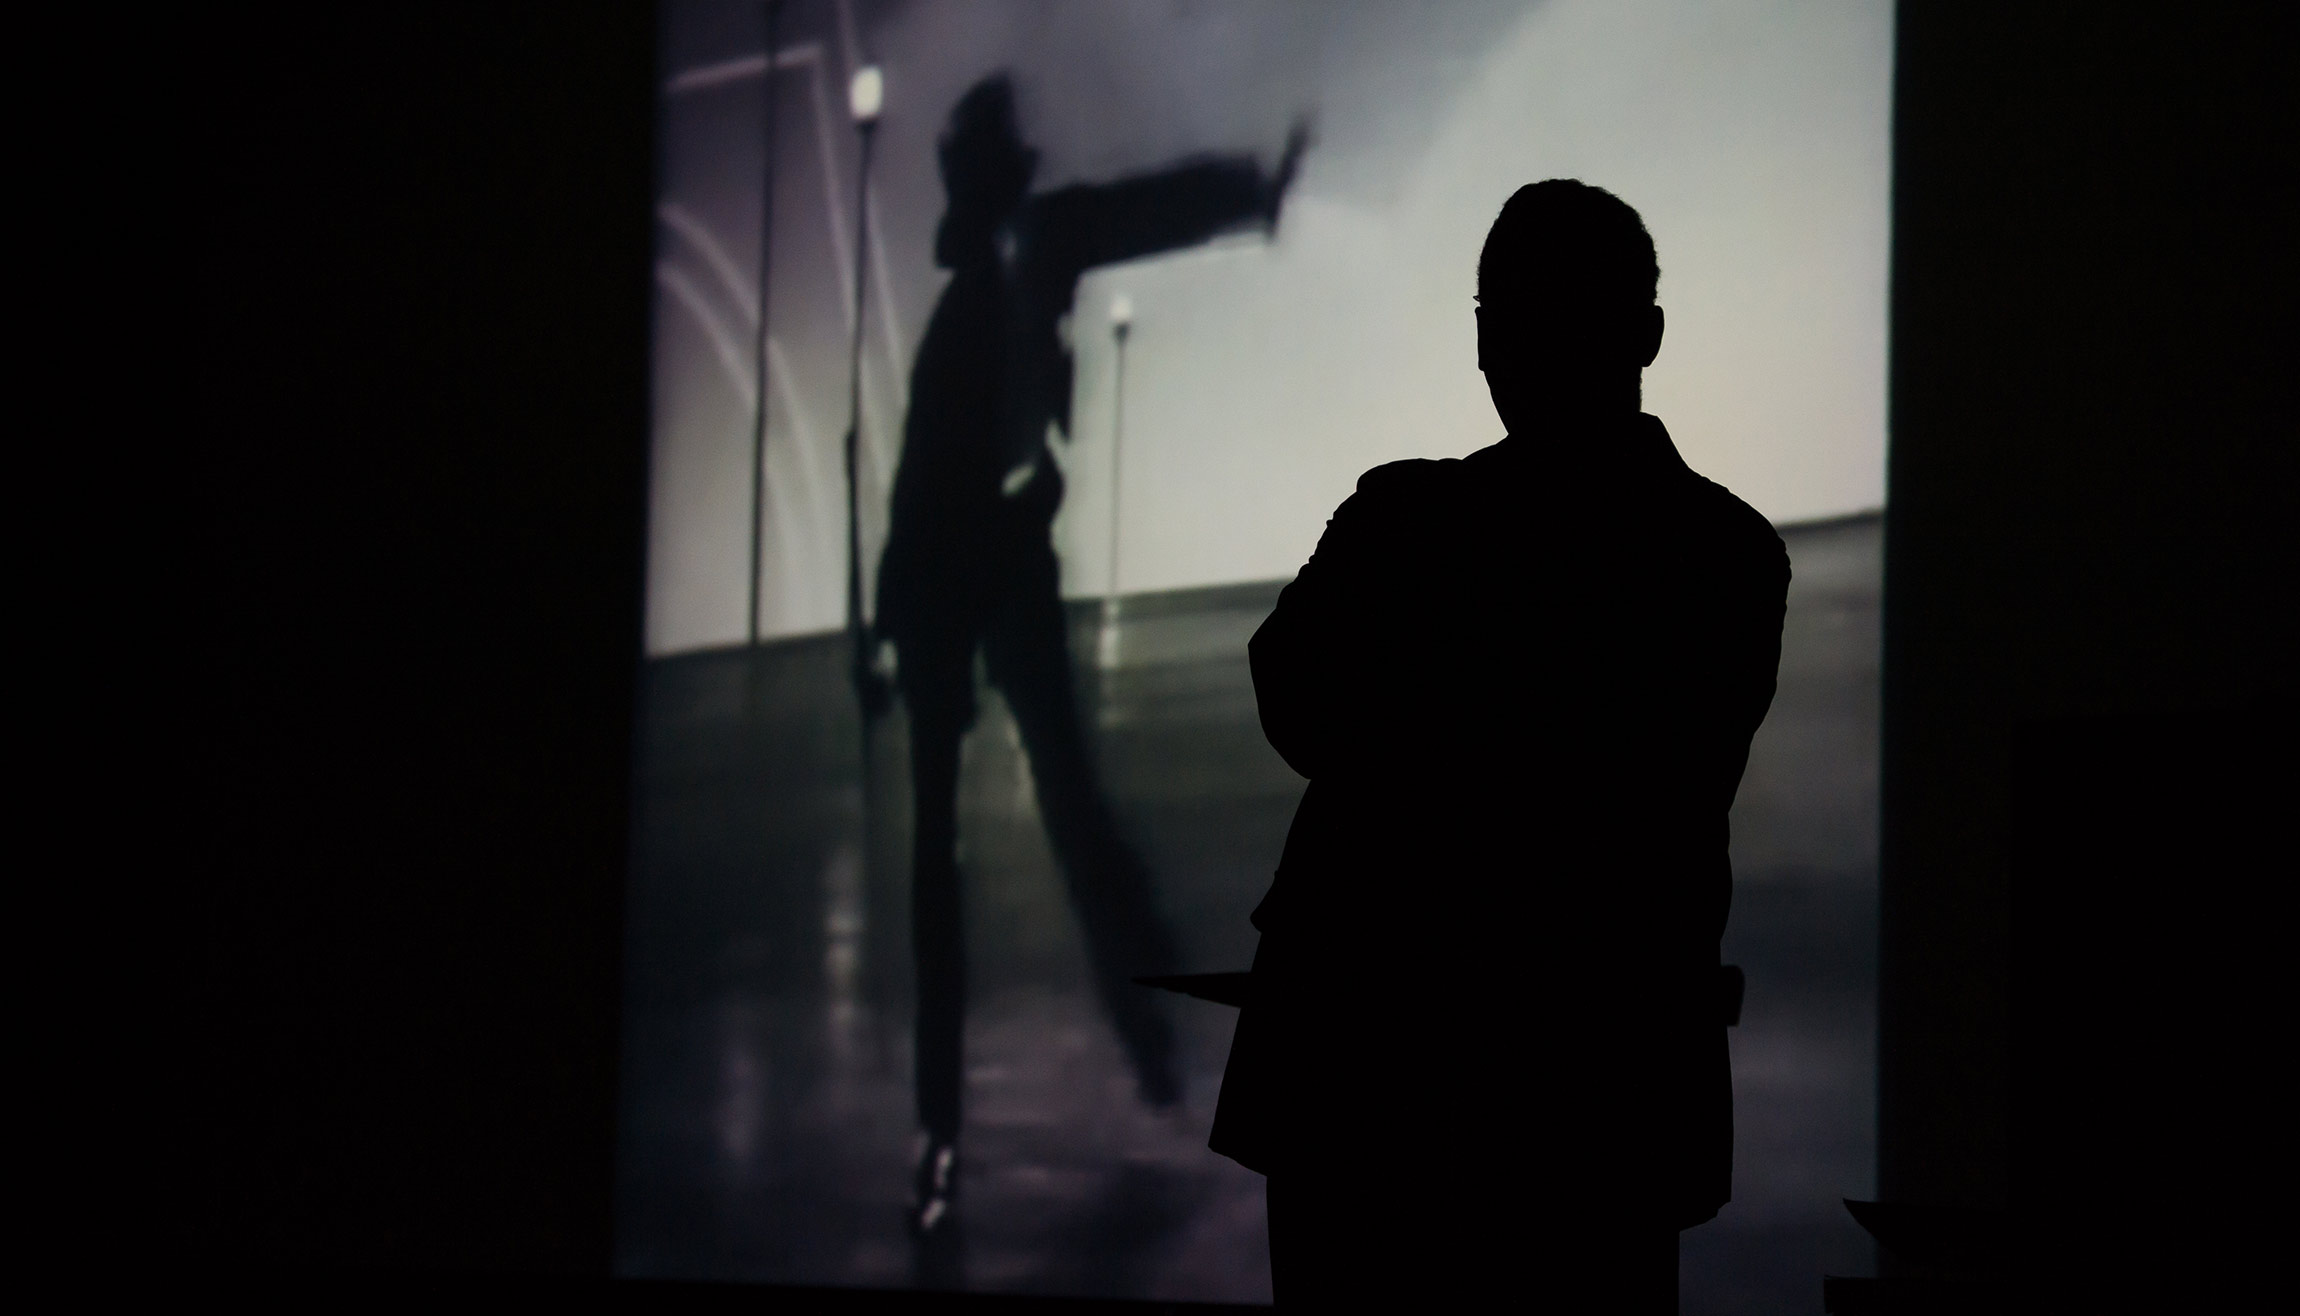 Paul BUrgett casts a shadow on a movie screen showing jazz musicians